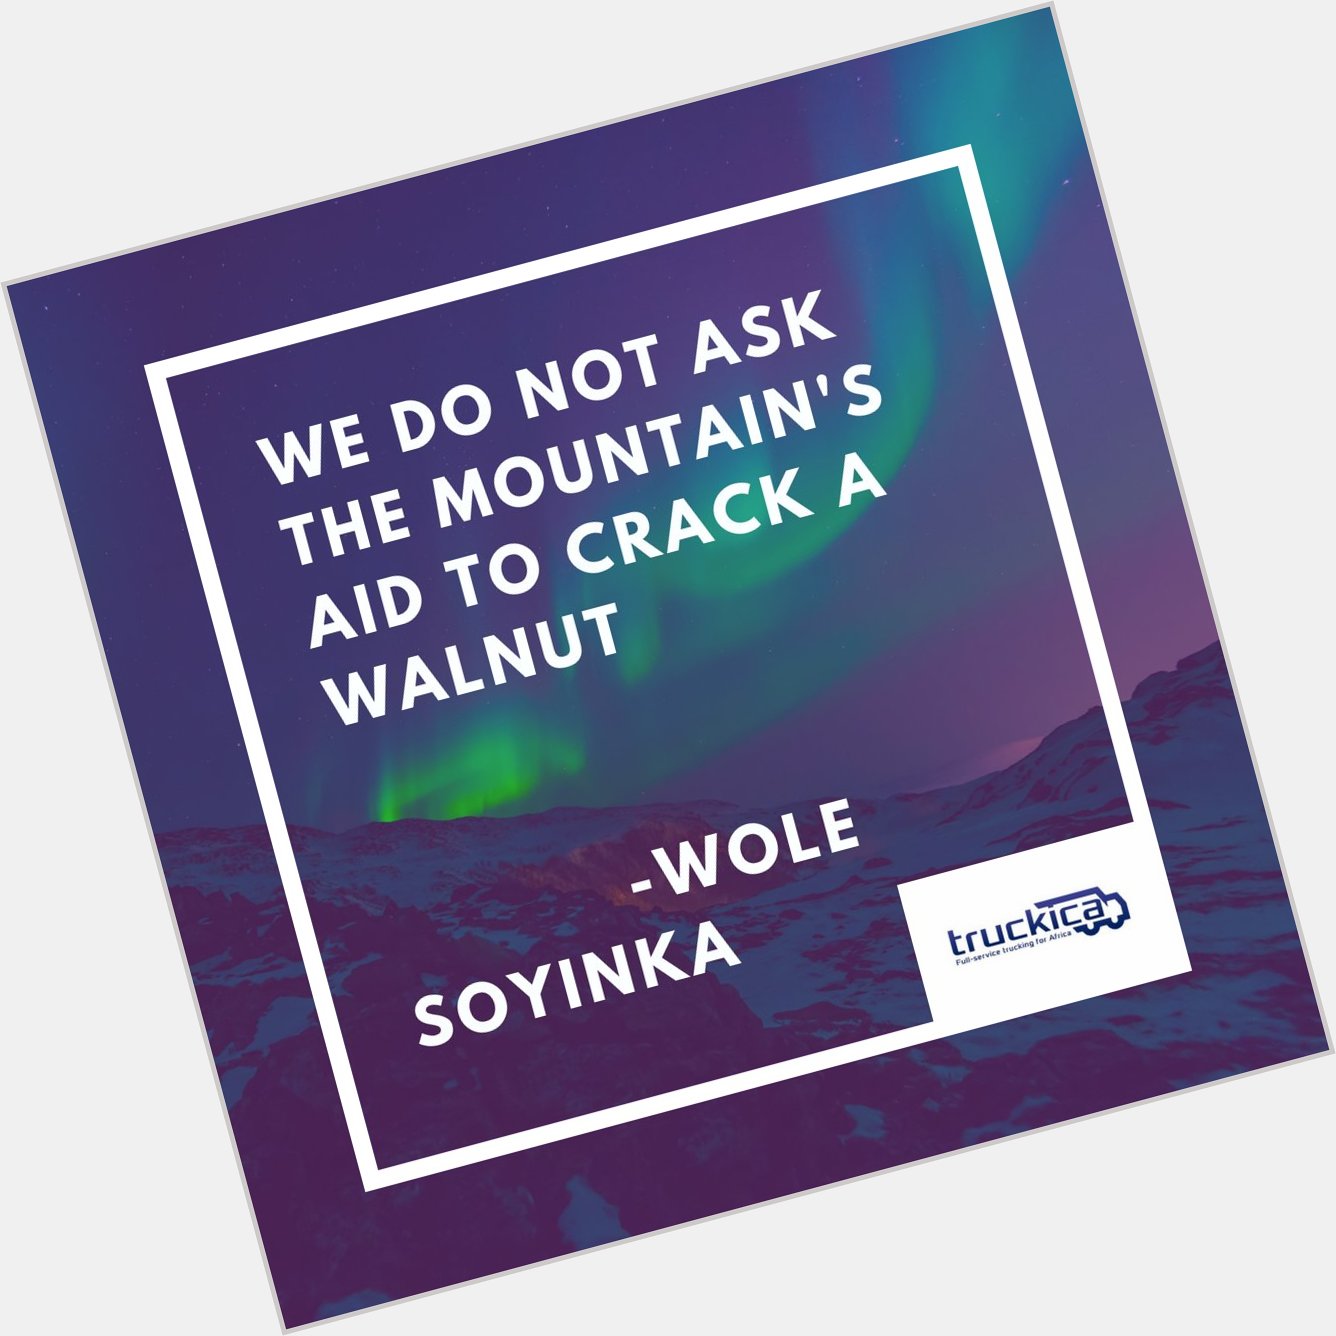 It\s only fitting to begin the day with a quote from Prof. Wole Soyinka.
Happy 84th birthday to him! 